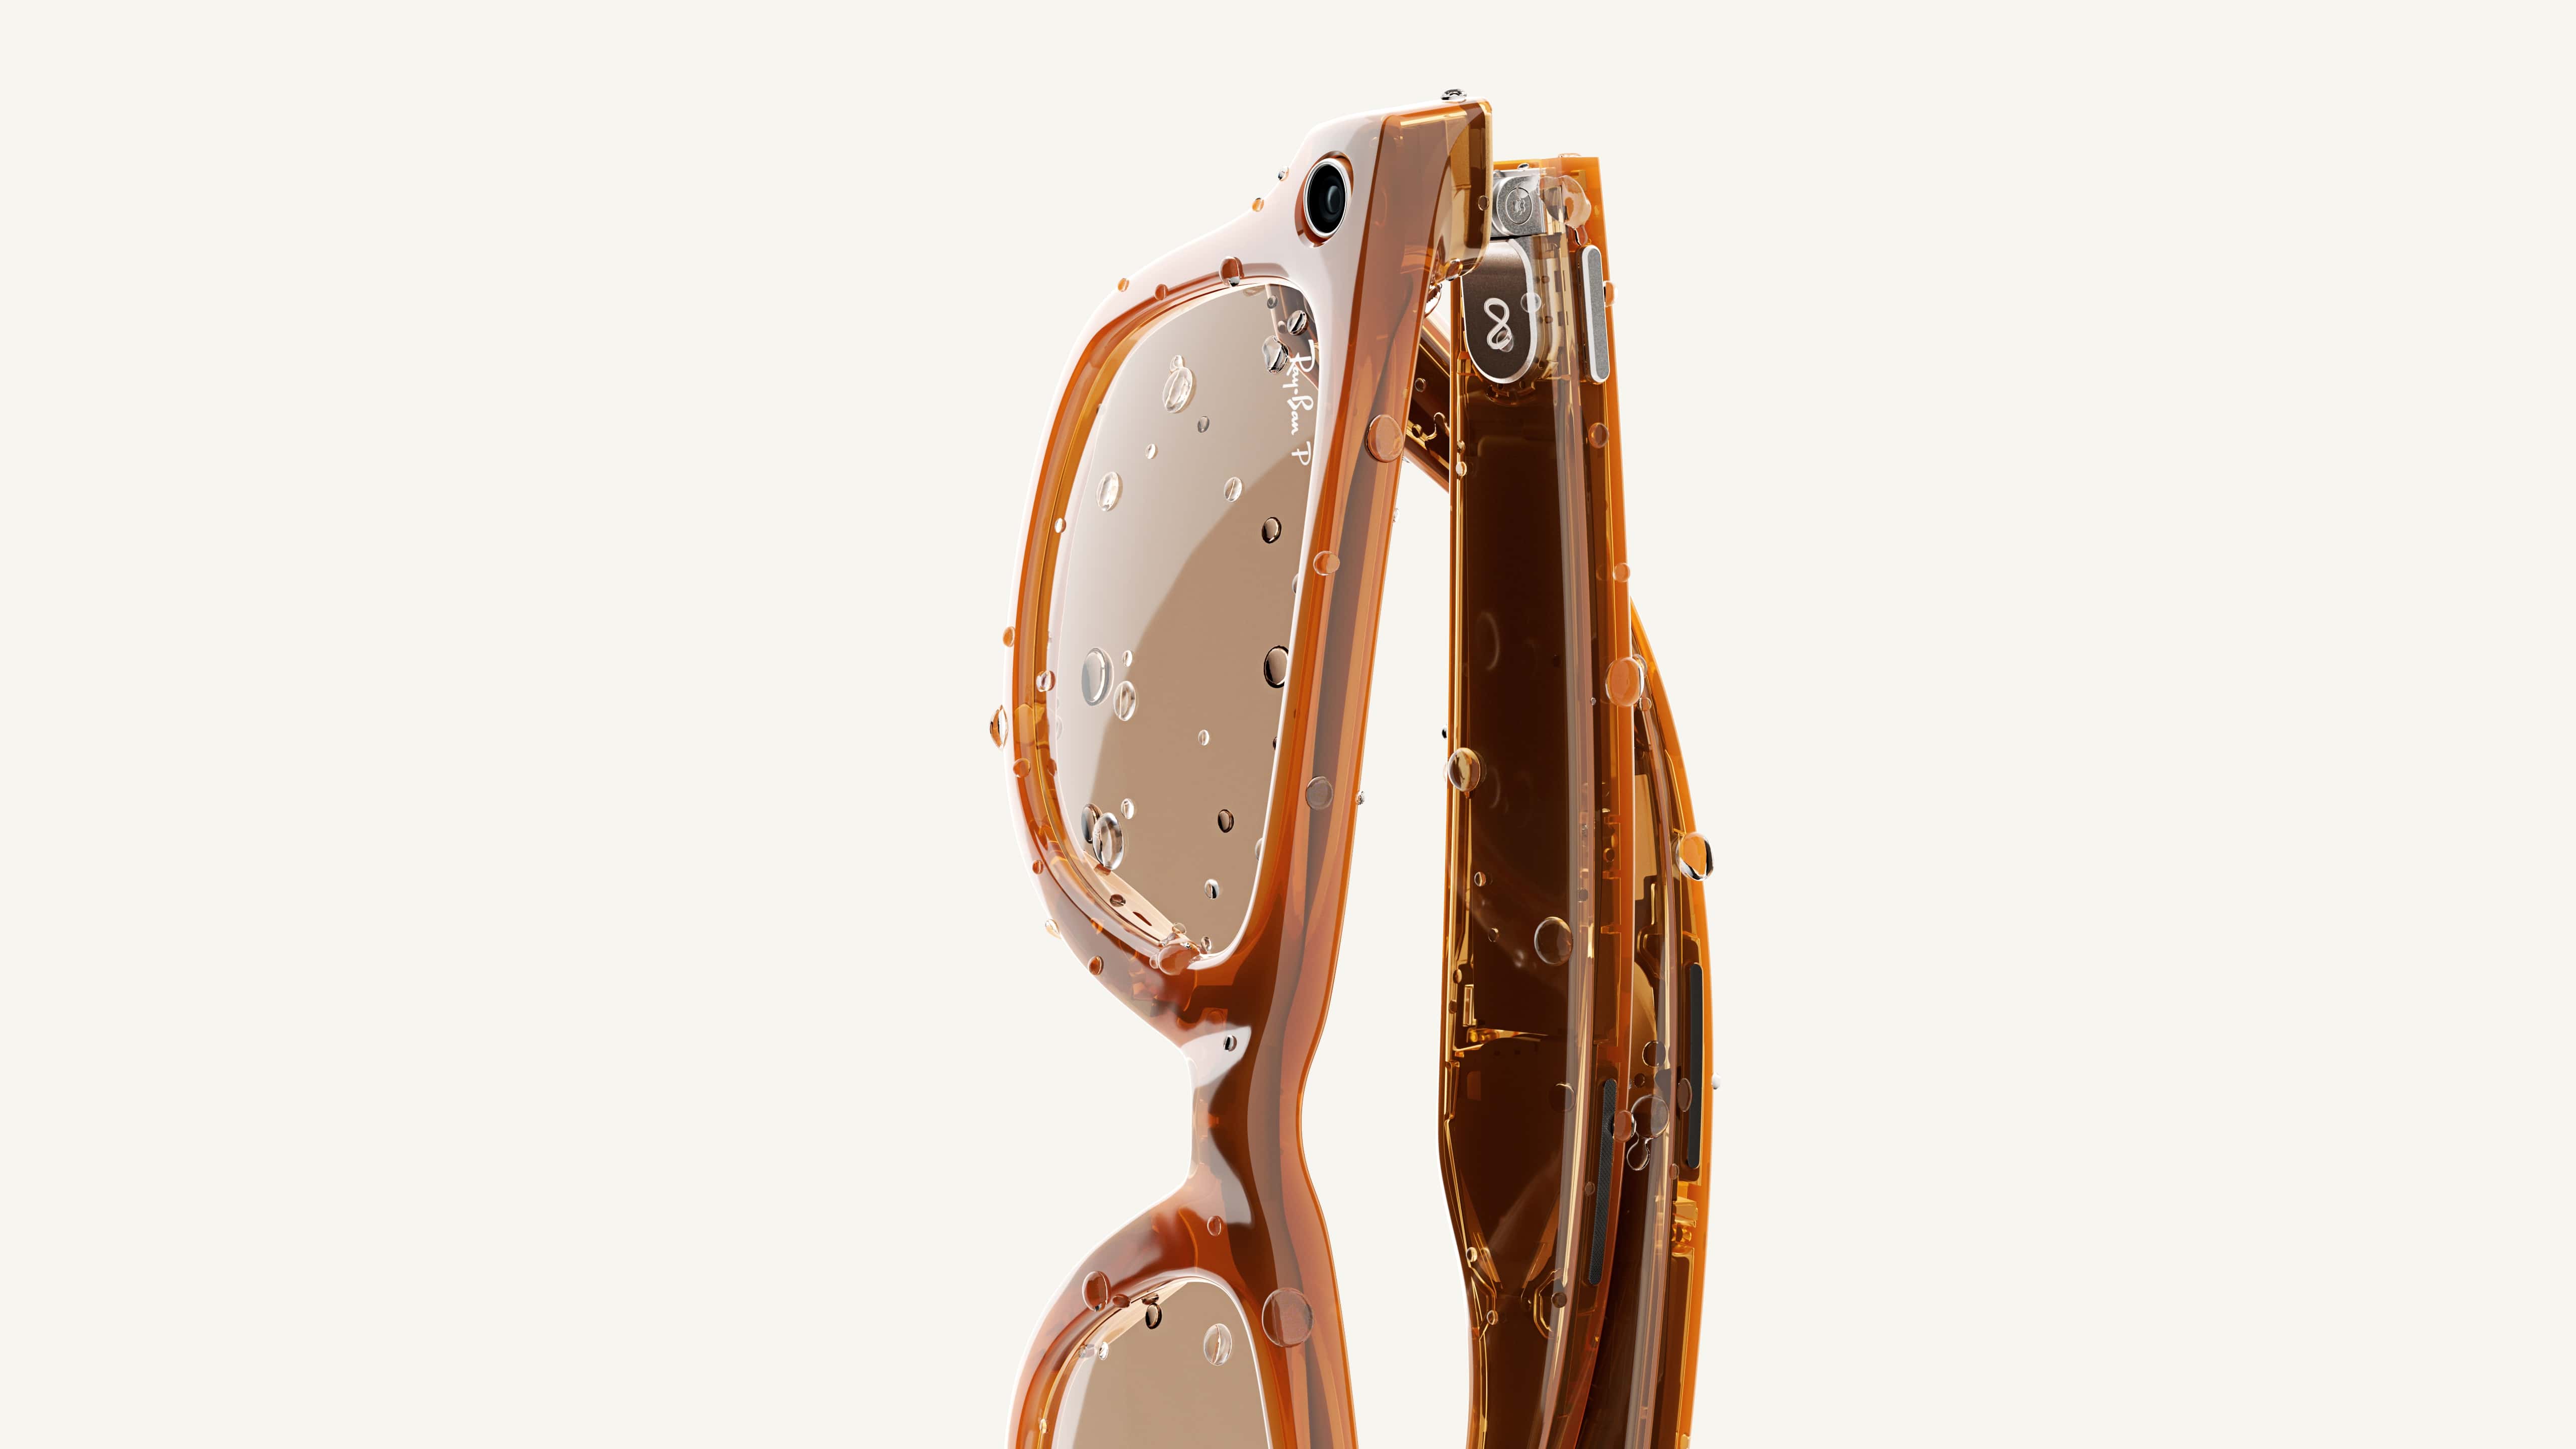 Ray-Ban Meta Smart Glasses covered in water droplets